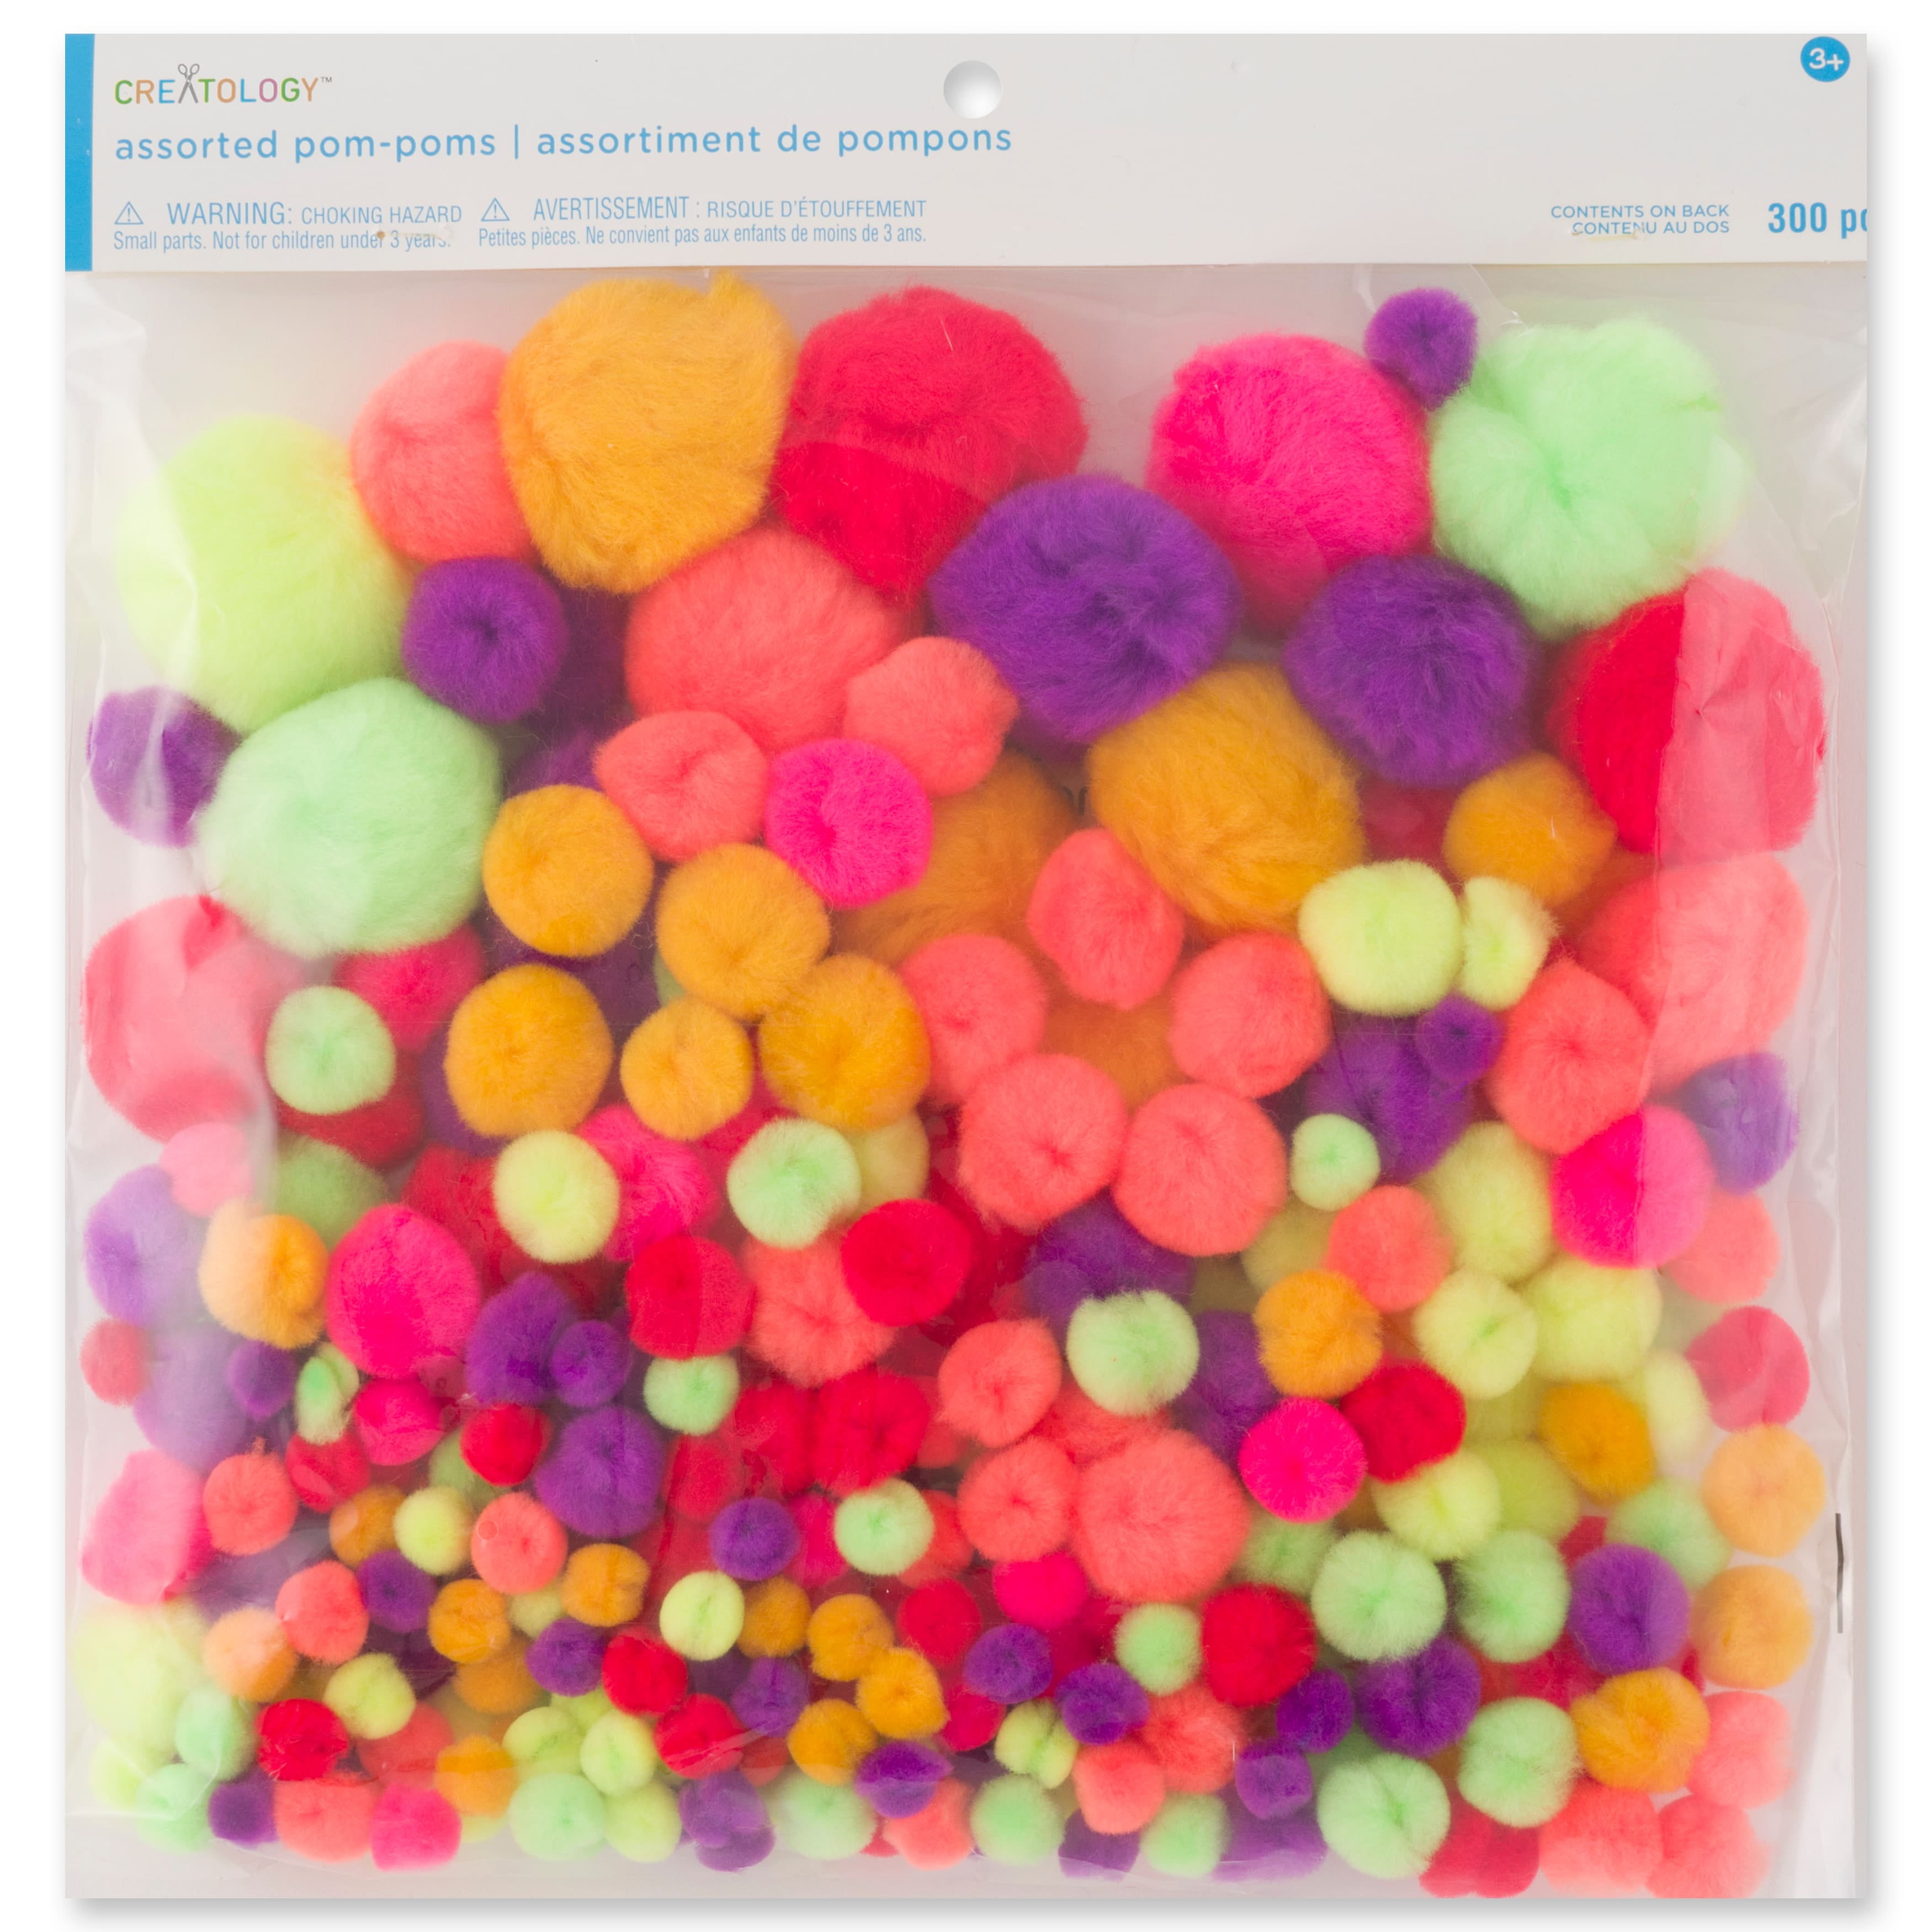 Techinal 100Pcs 25mm Mini Fluffy Soft Pom Poms Pompoms Glitter Ball  Handmade Kids Toys DIY Sewing Craft Supplies Mixed Color 